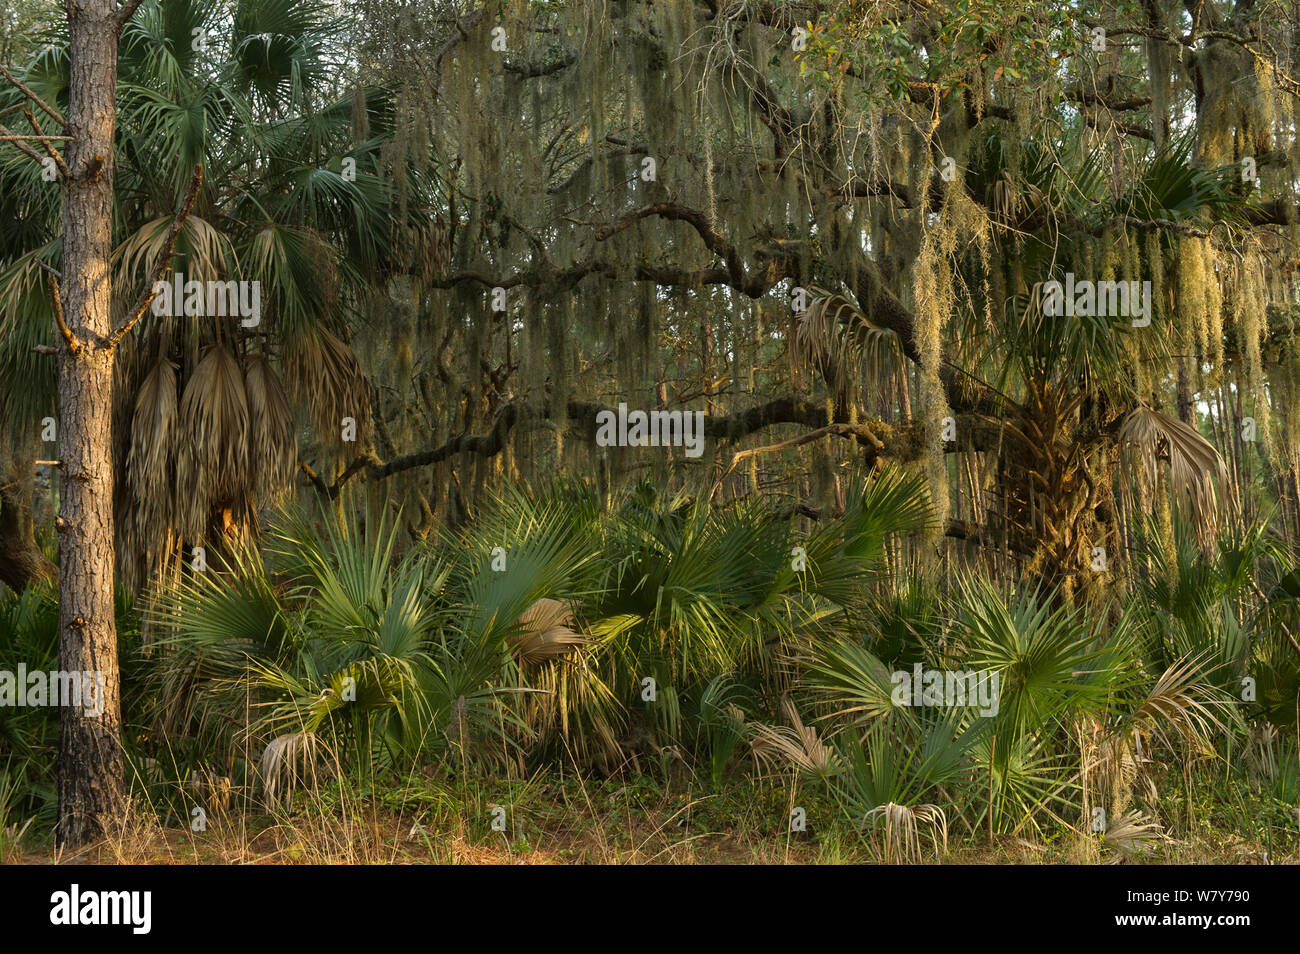 Coastal forest with Spanish moss (Tillandsia usneoides) growing on Southern live oak (Quercus virginiana) and Saw palmetto (Serenoa repens). Little St Simon&#39;s Island, Barrier Islands, Georgia, USA, March. Stock Photo